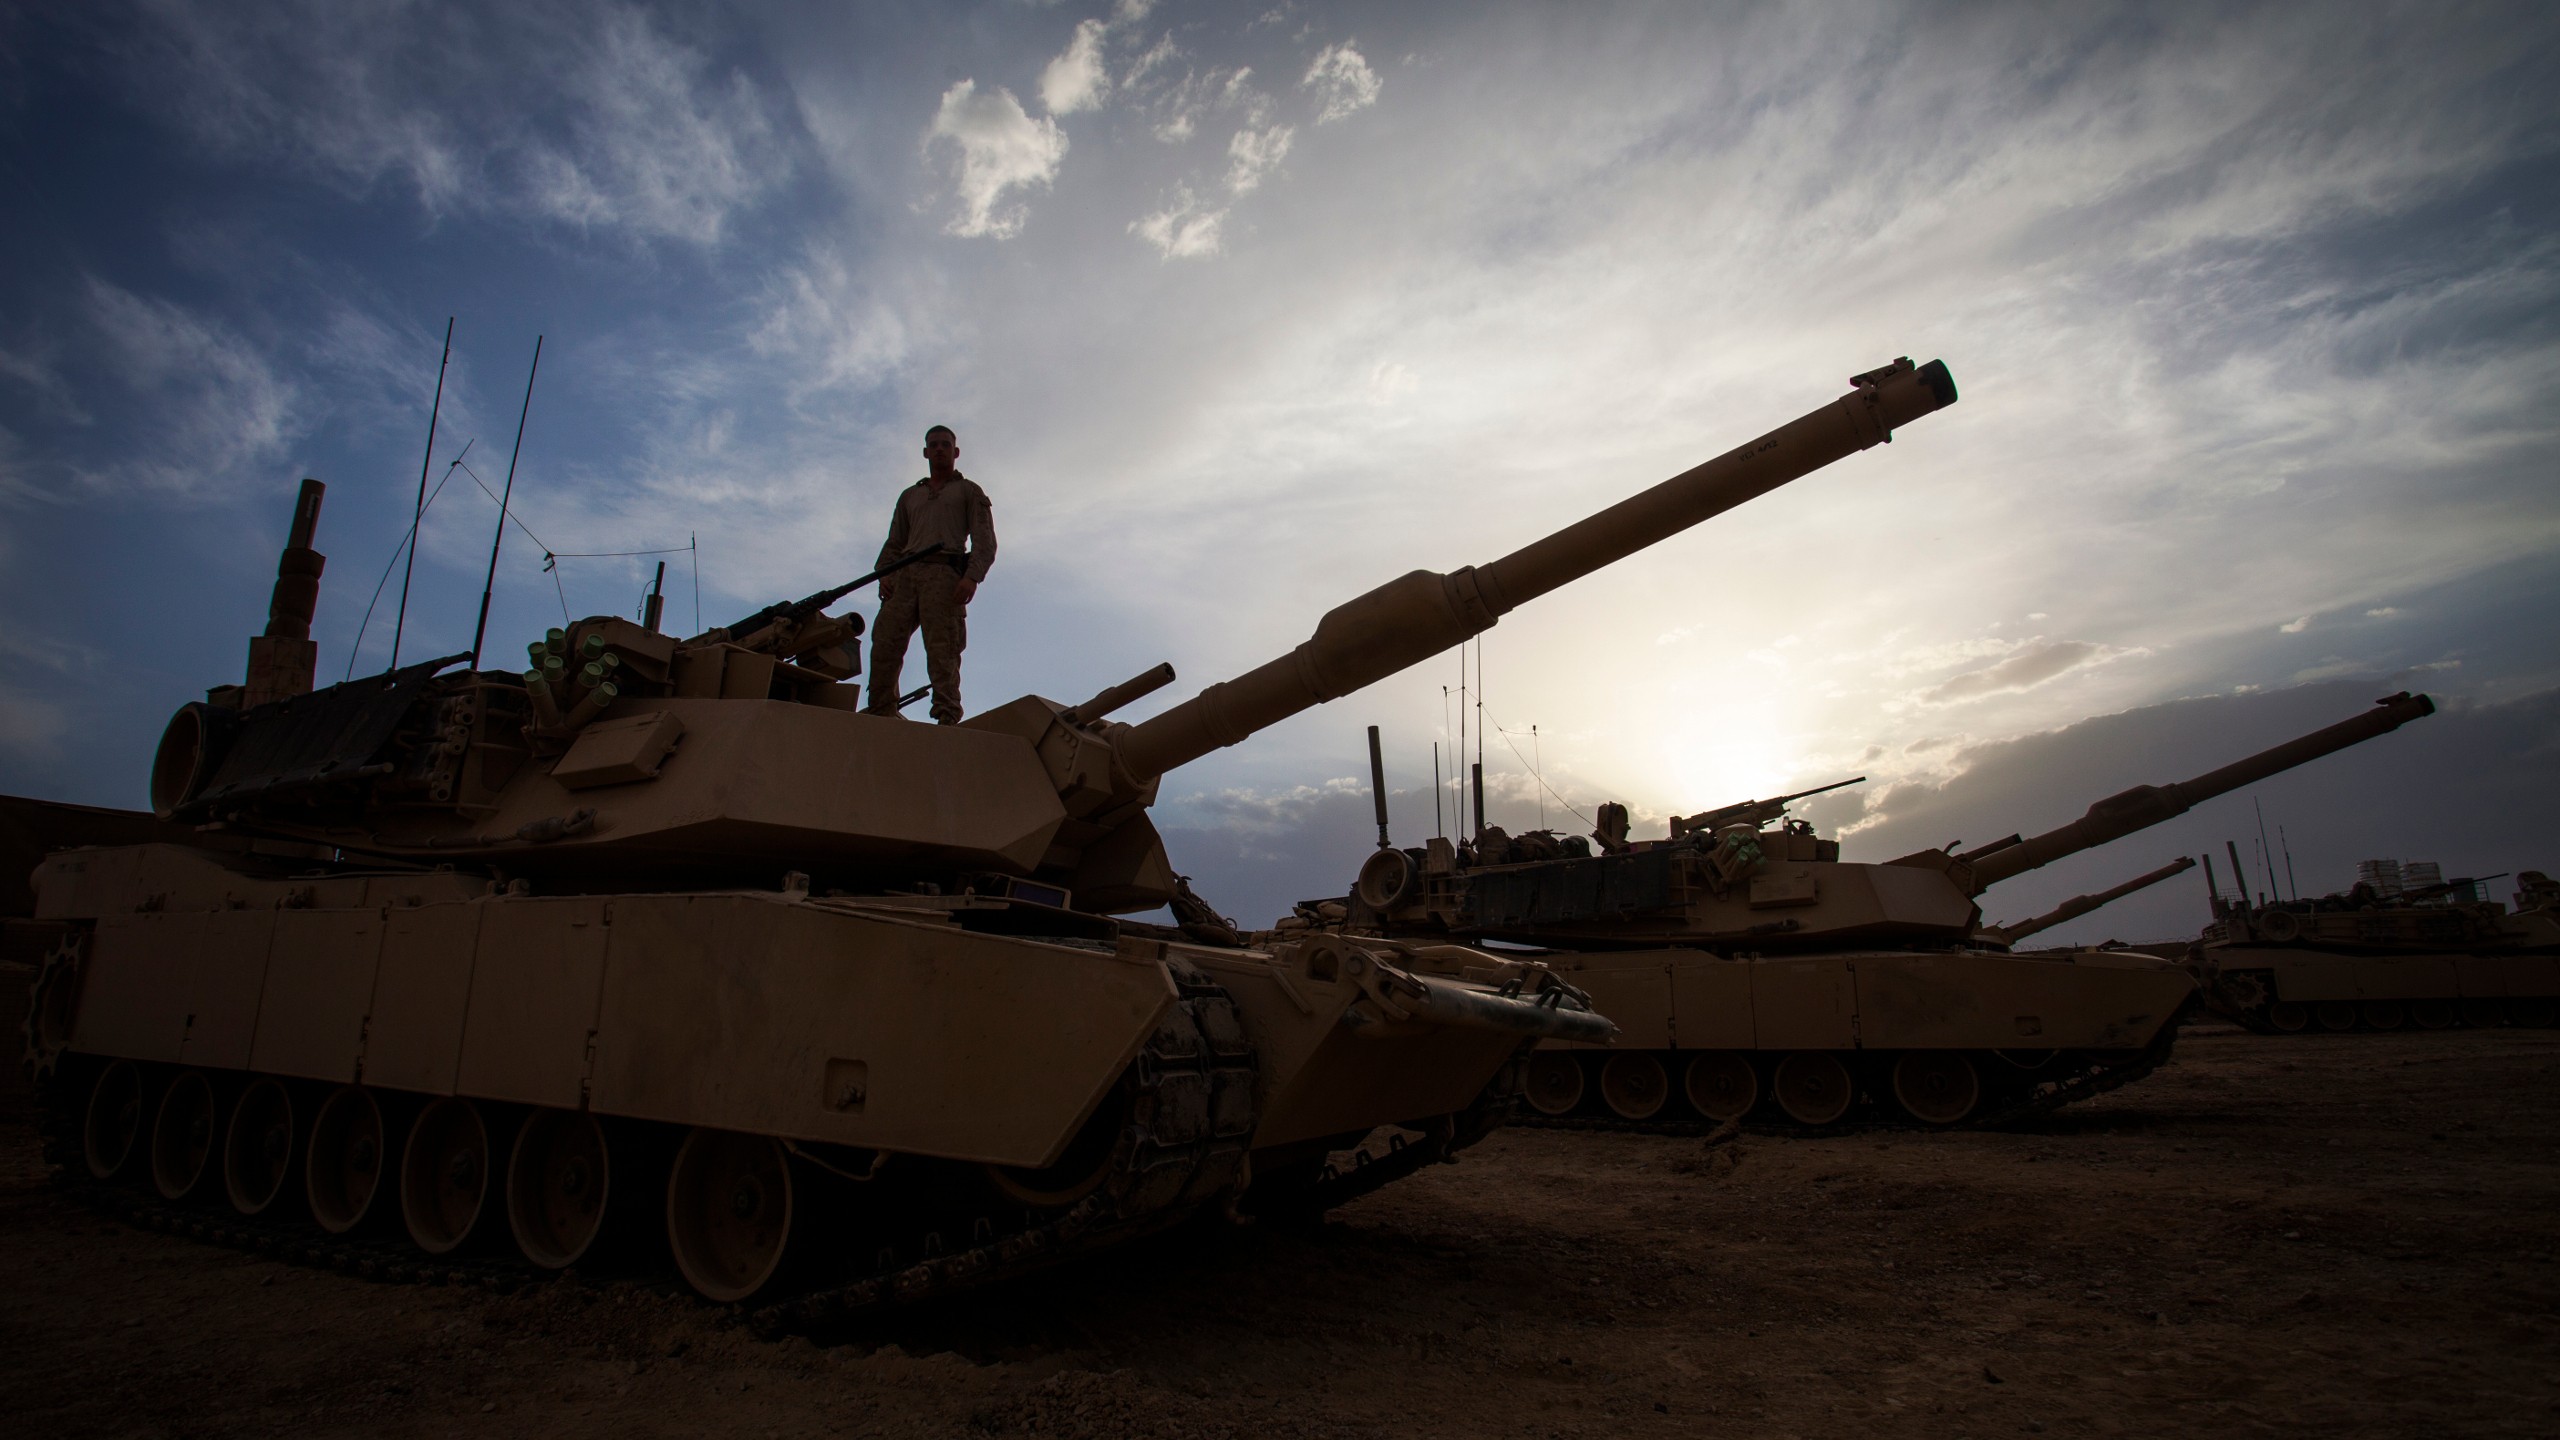 how much does an u.s. military tank cost